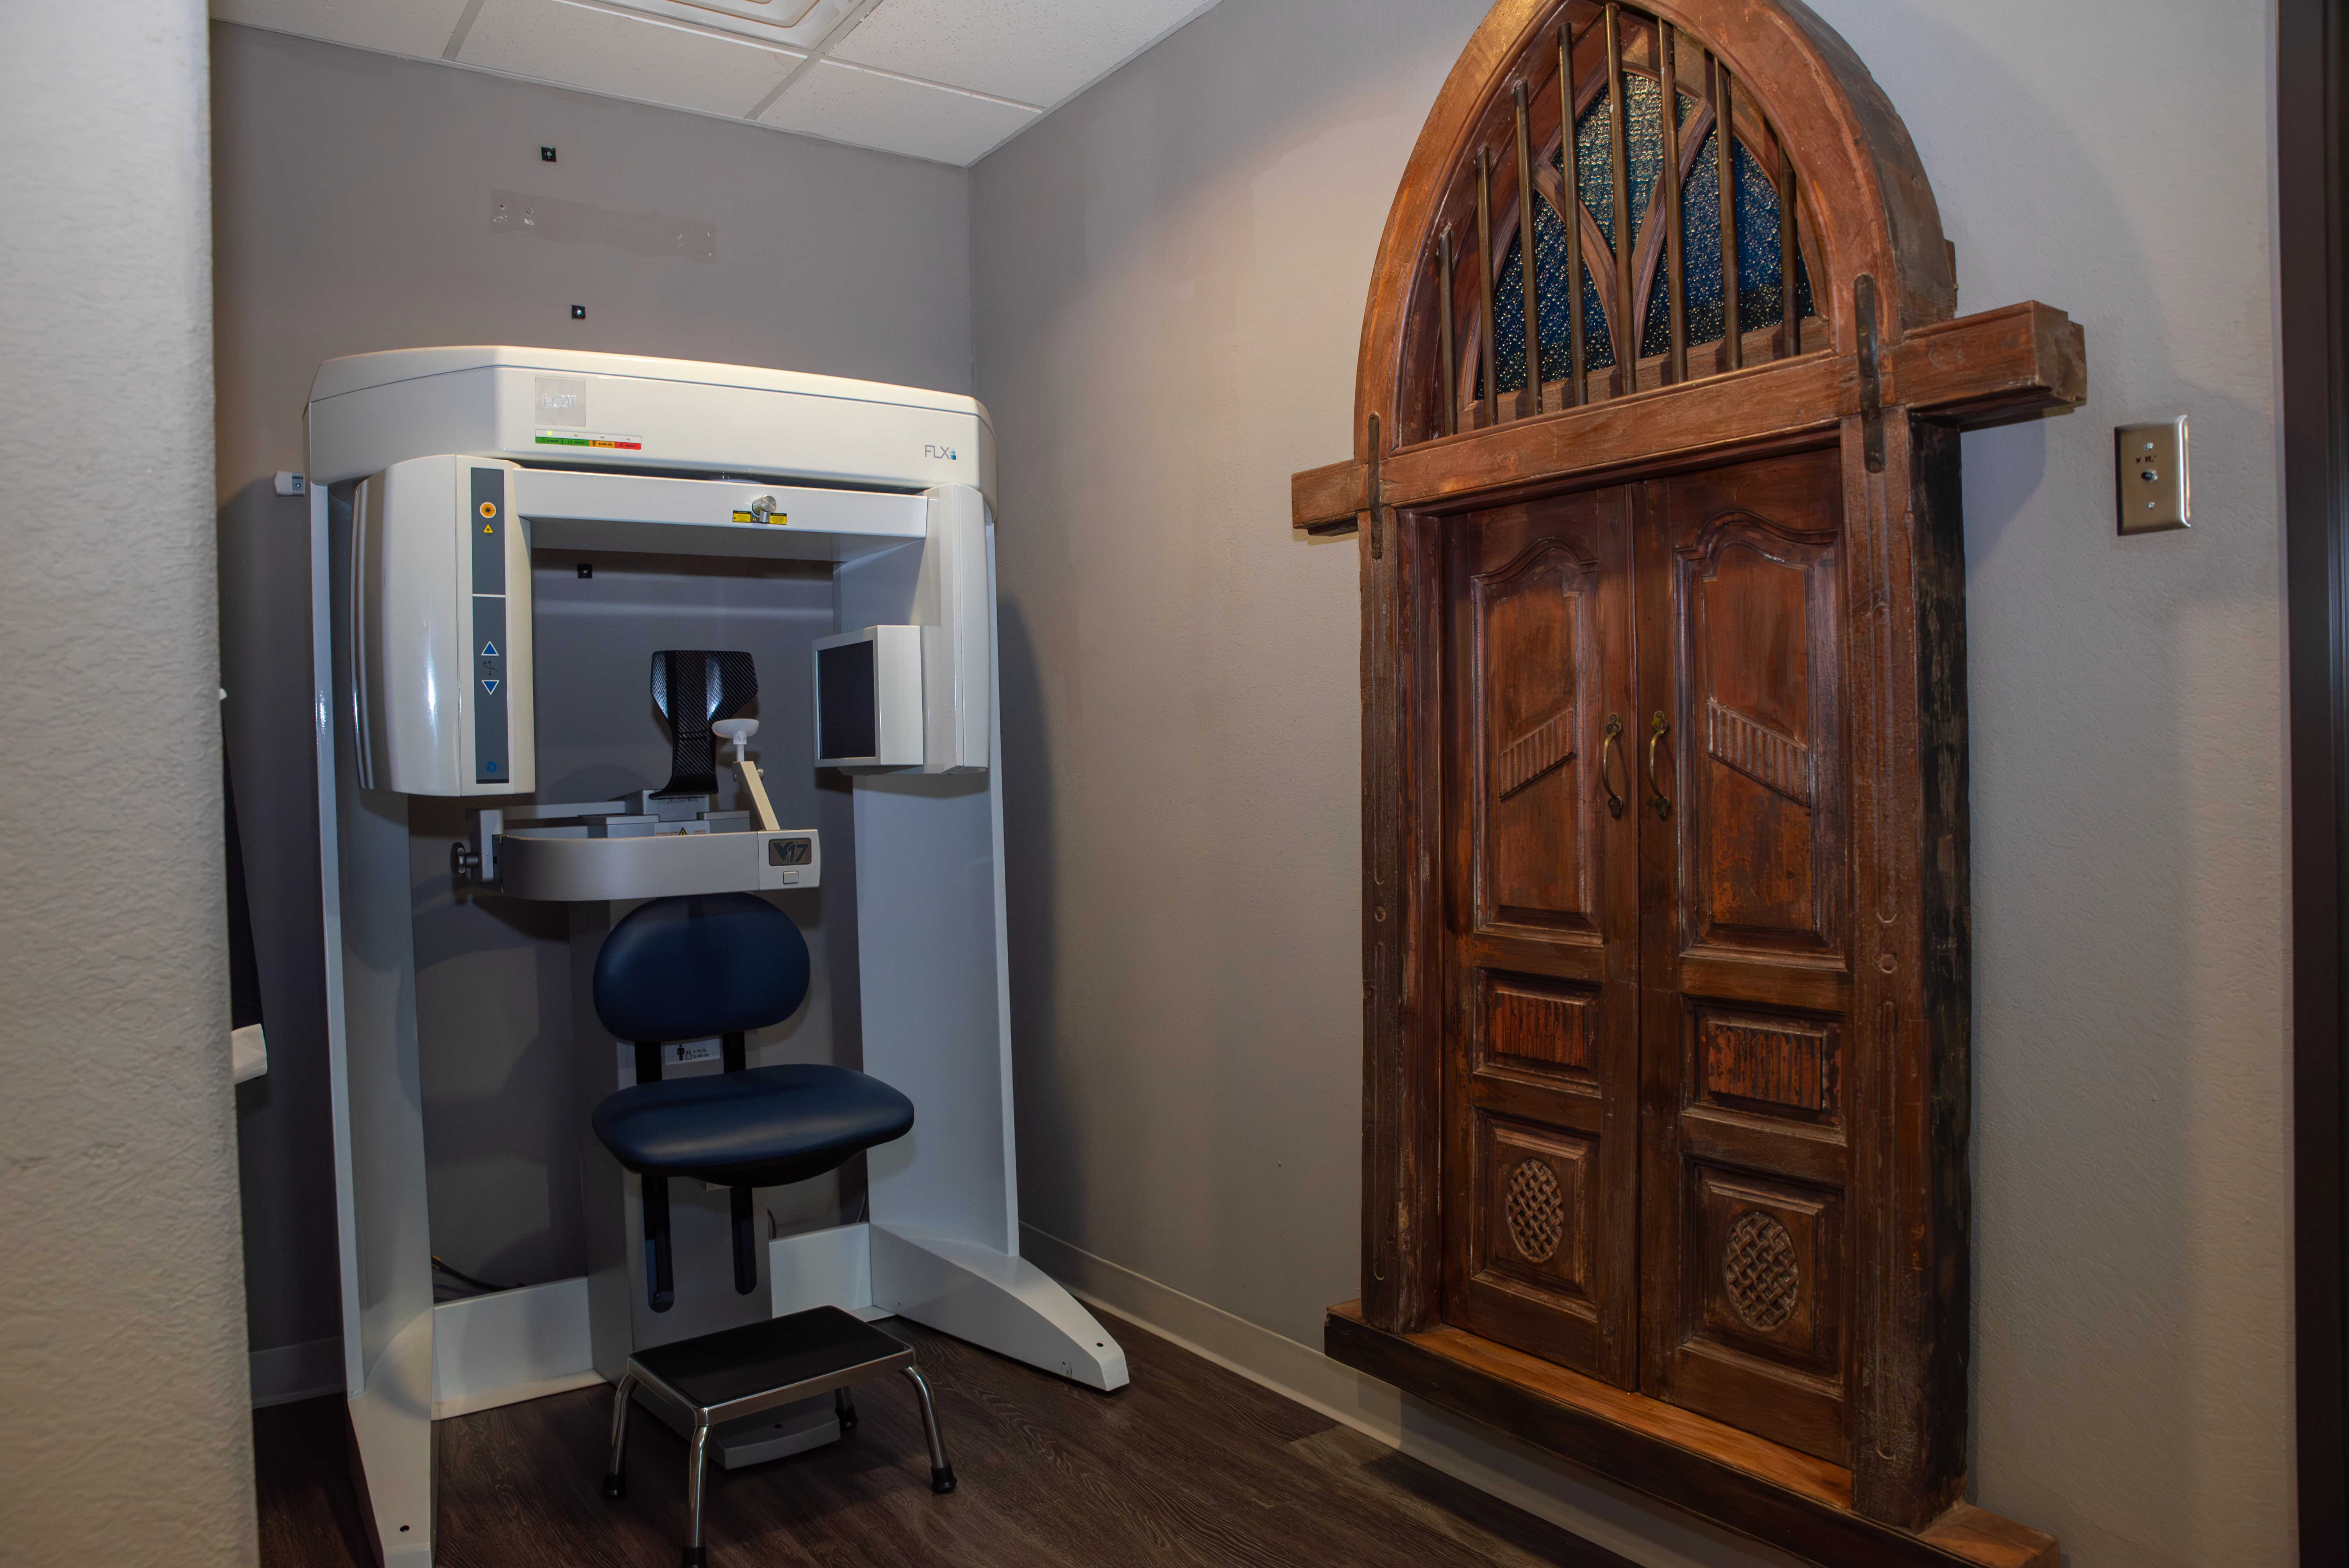 A medical technology instrument next to an elegant brown exit door